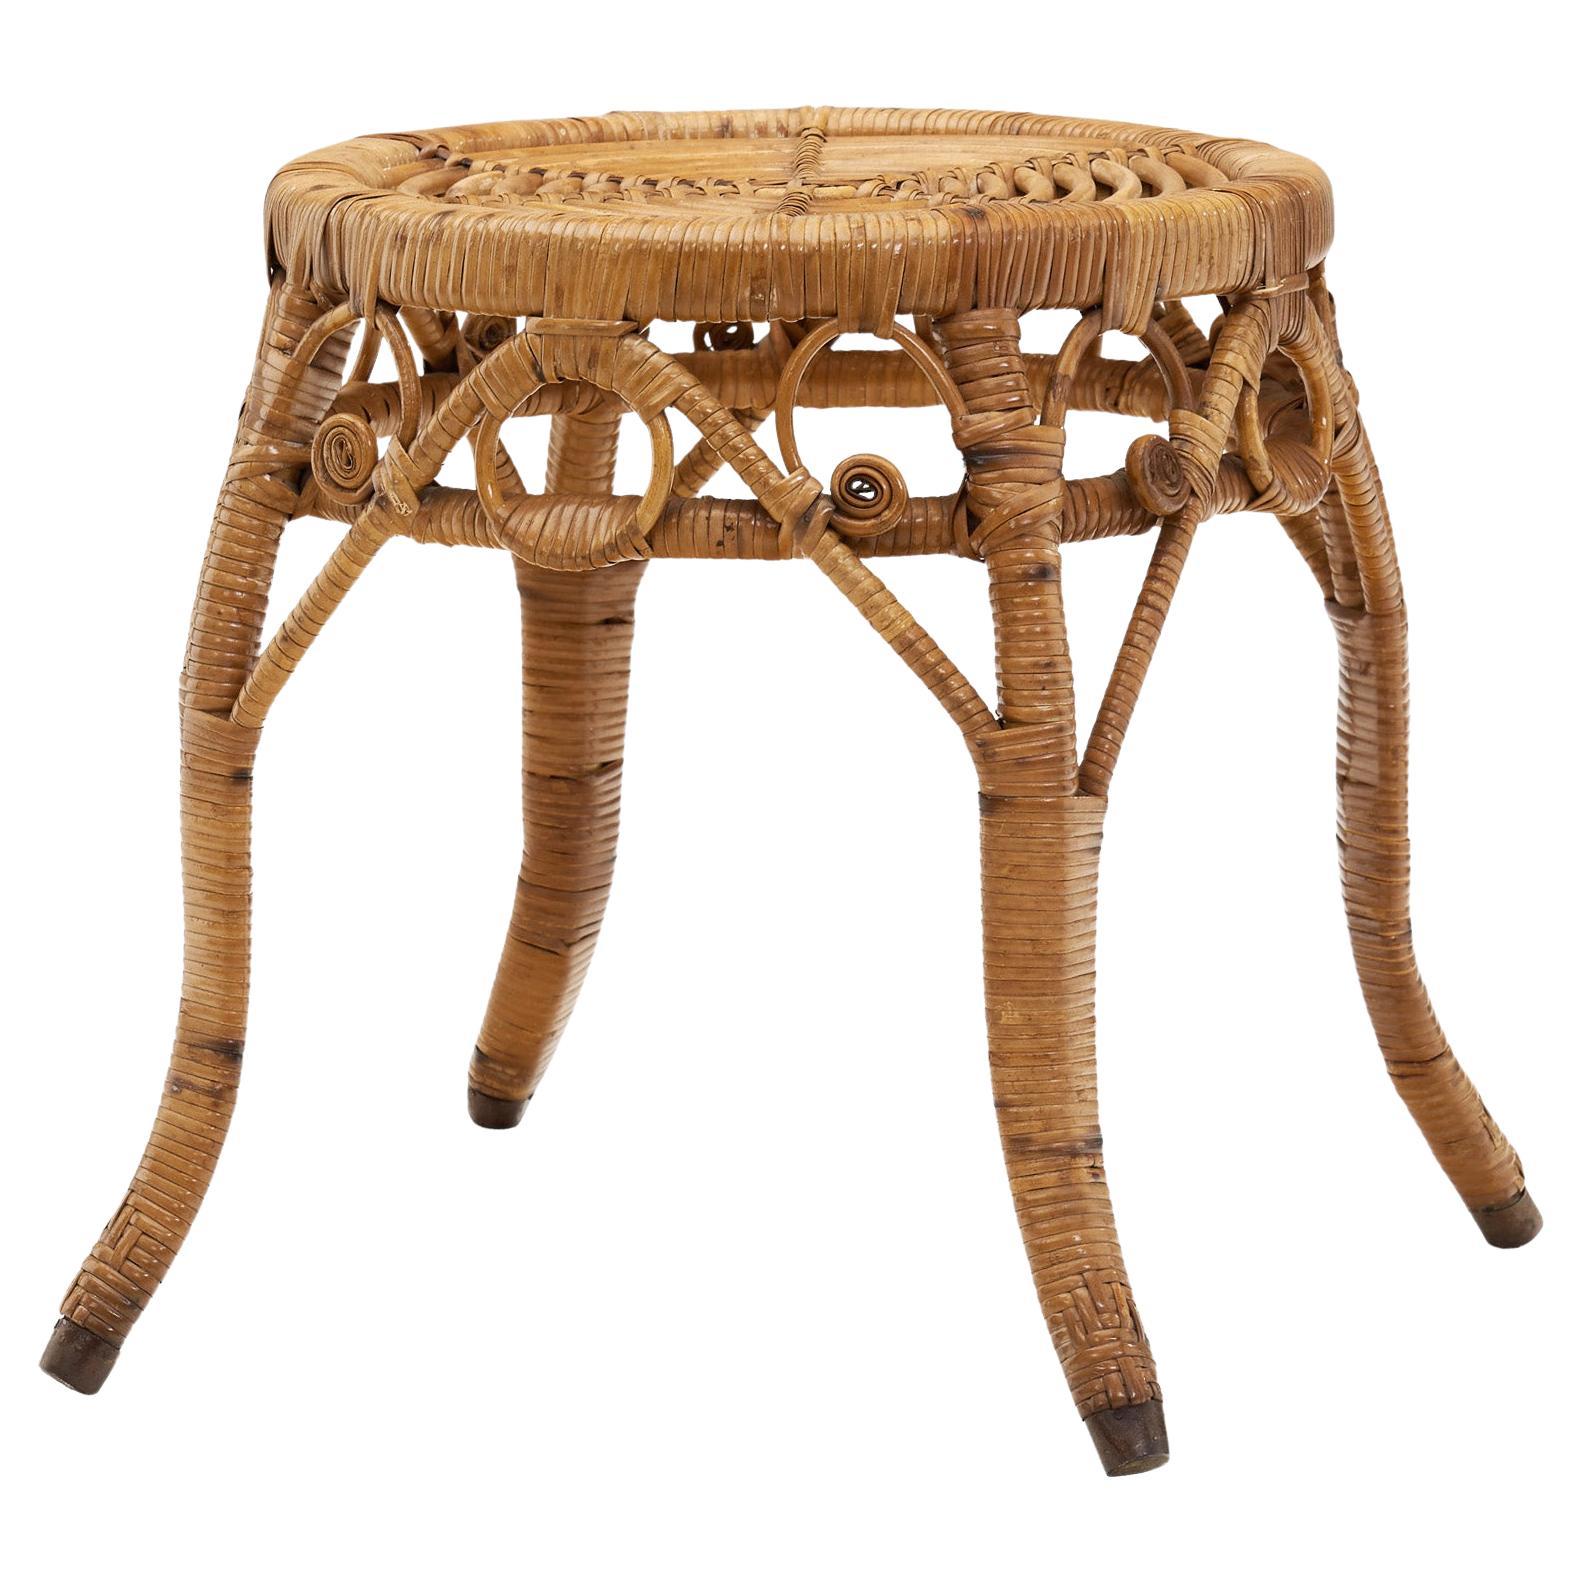 Woven Rattan Stool, Europe Early 20th Century For Sale